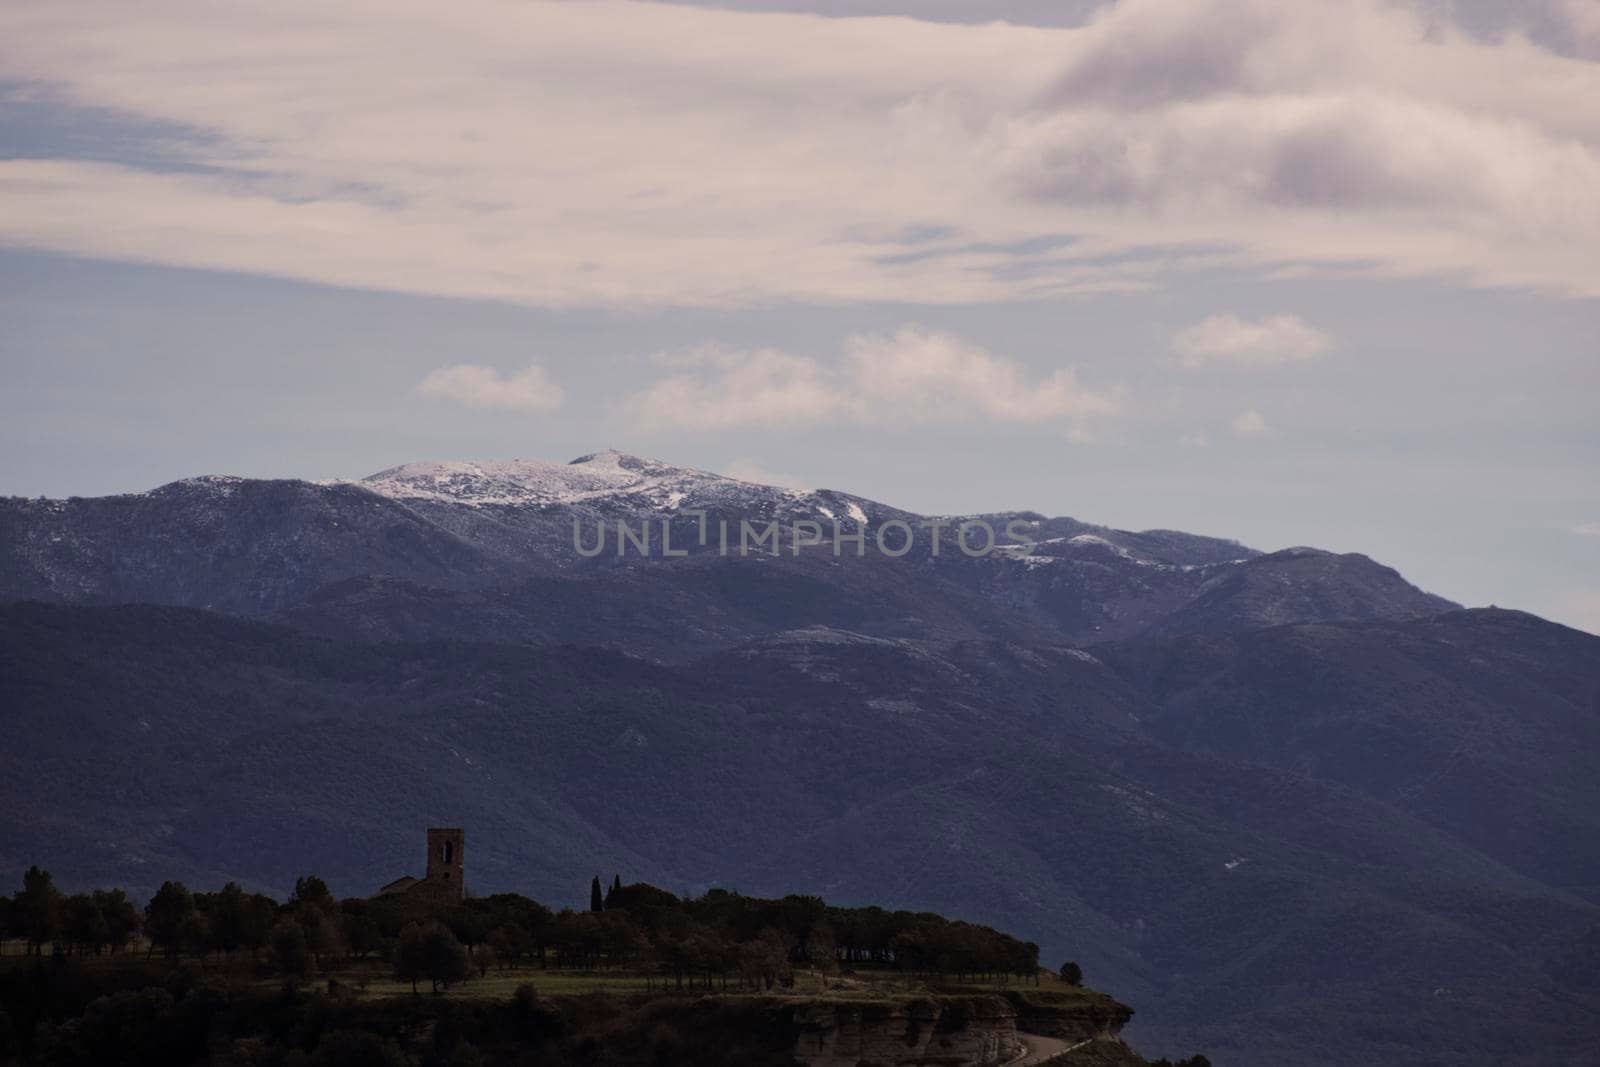 Landscape showing Tona Castle under snowy mountains and cloudy sky in Tona town in Catalonia